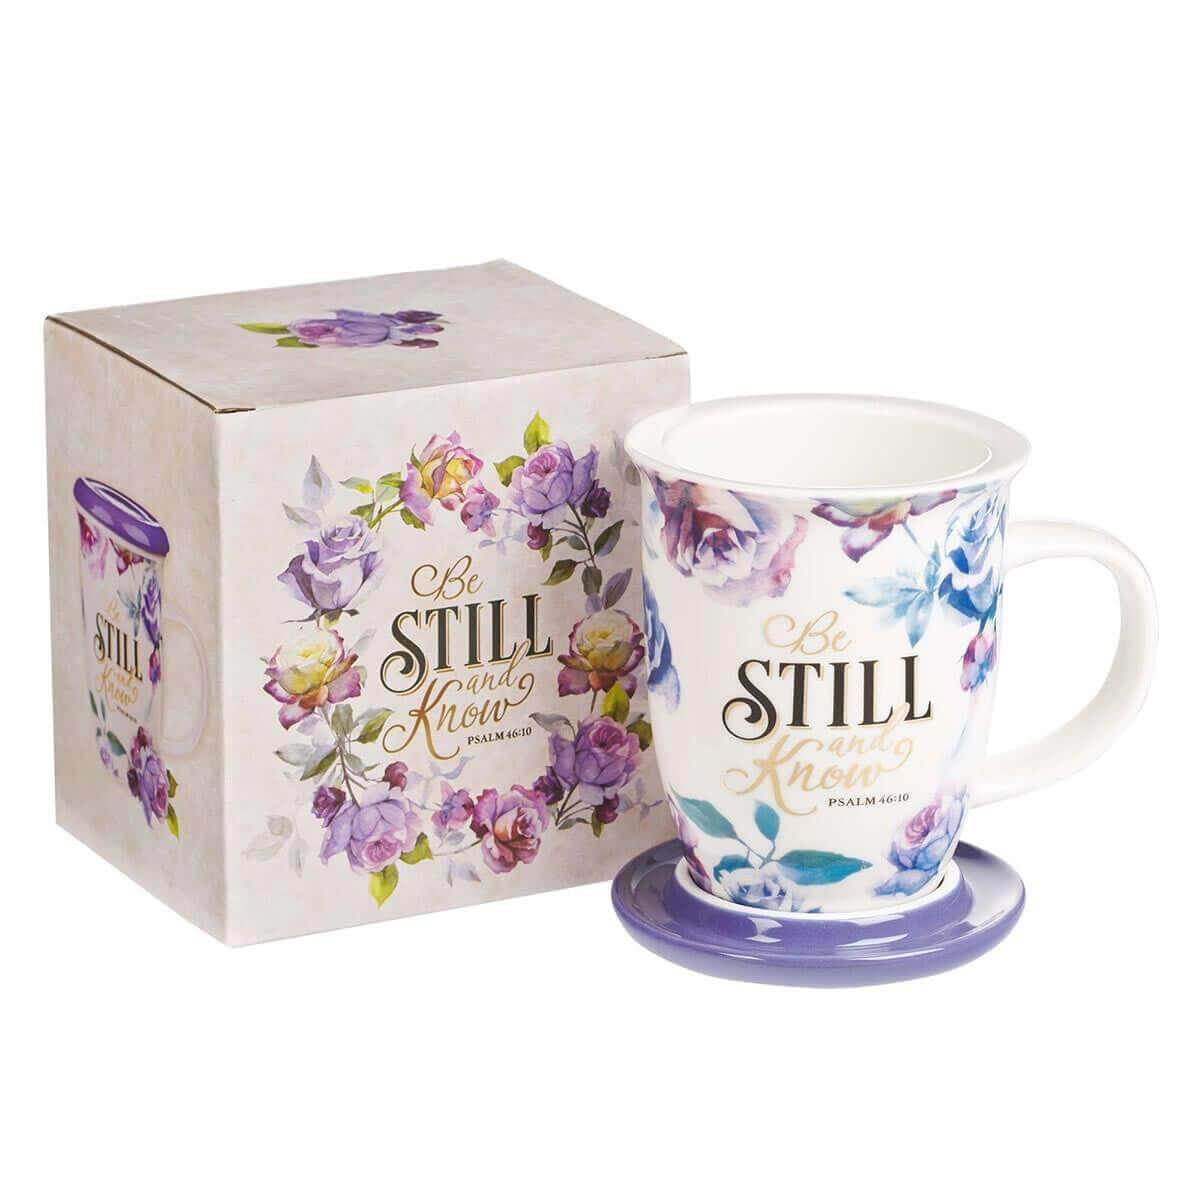 Be Still and Know Lidded Ceramic Mug in Purple - Psalm 46:10 | 2FruitBearers